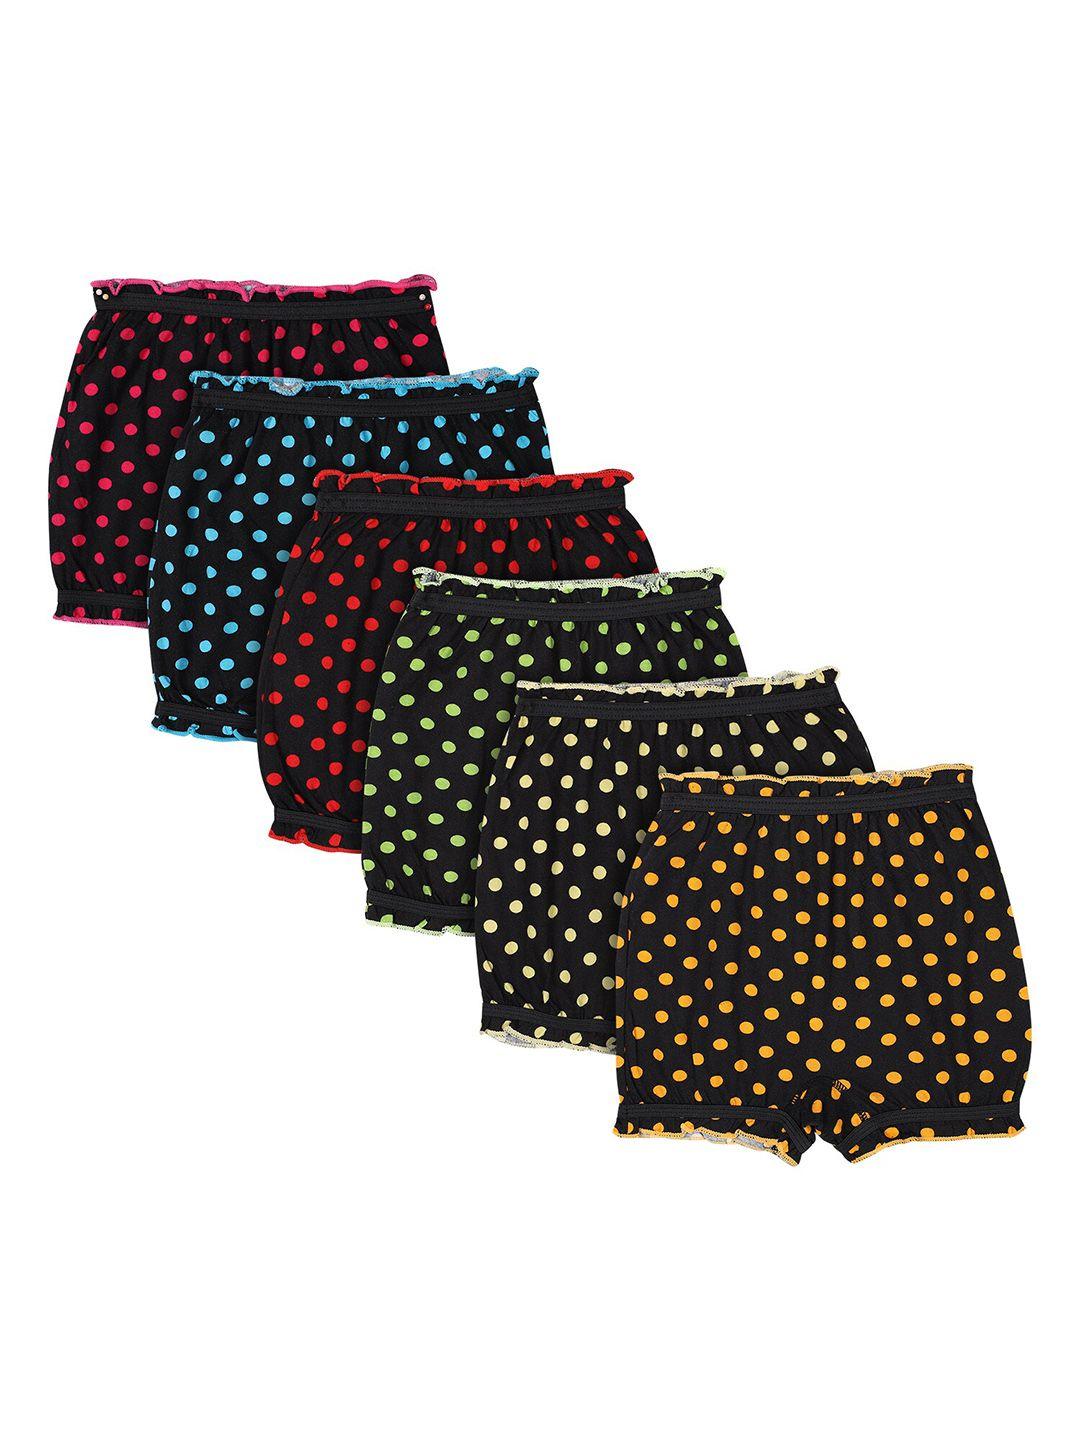 bodycare kids pack of 6 assorted basic briefs